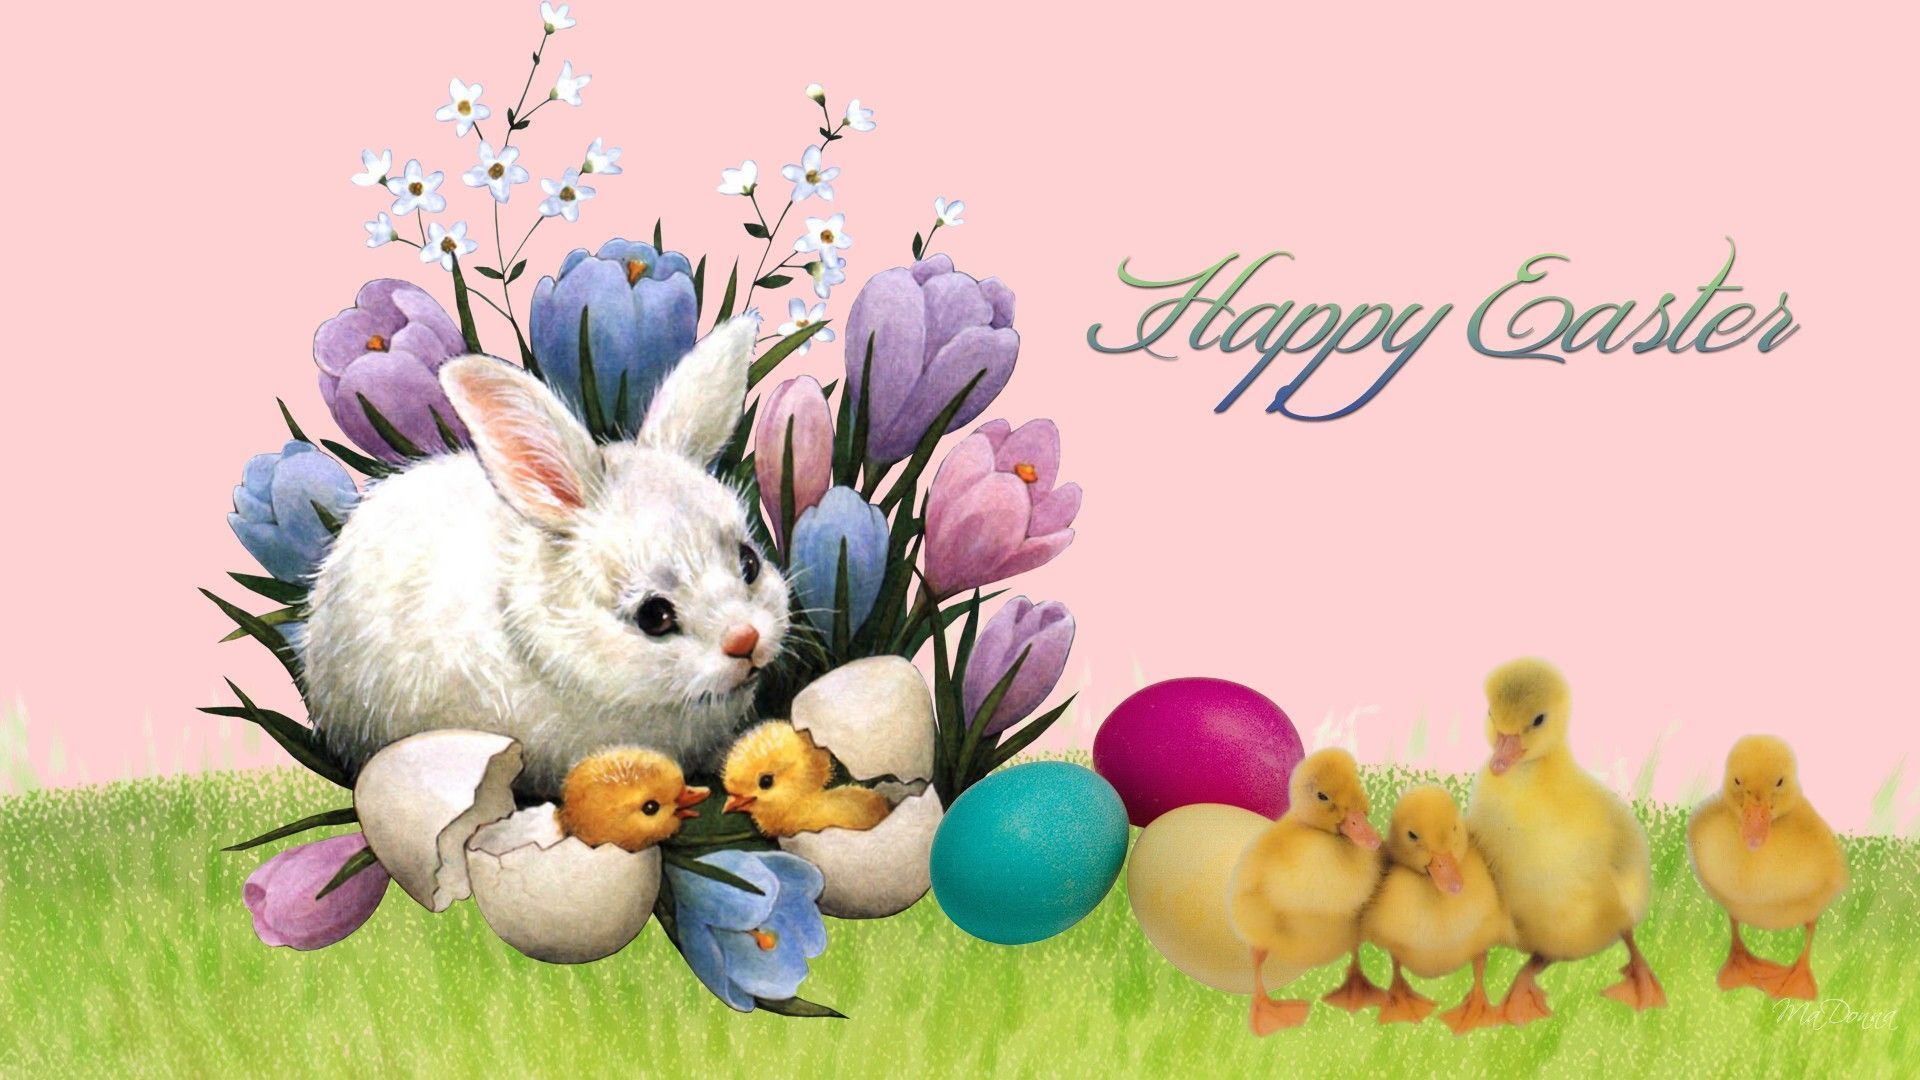 Easter Bunny HD Wallpaper Free. Happy easter wallpaper, Easter wallpaper, Easter bunny image